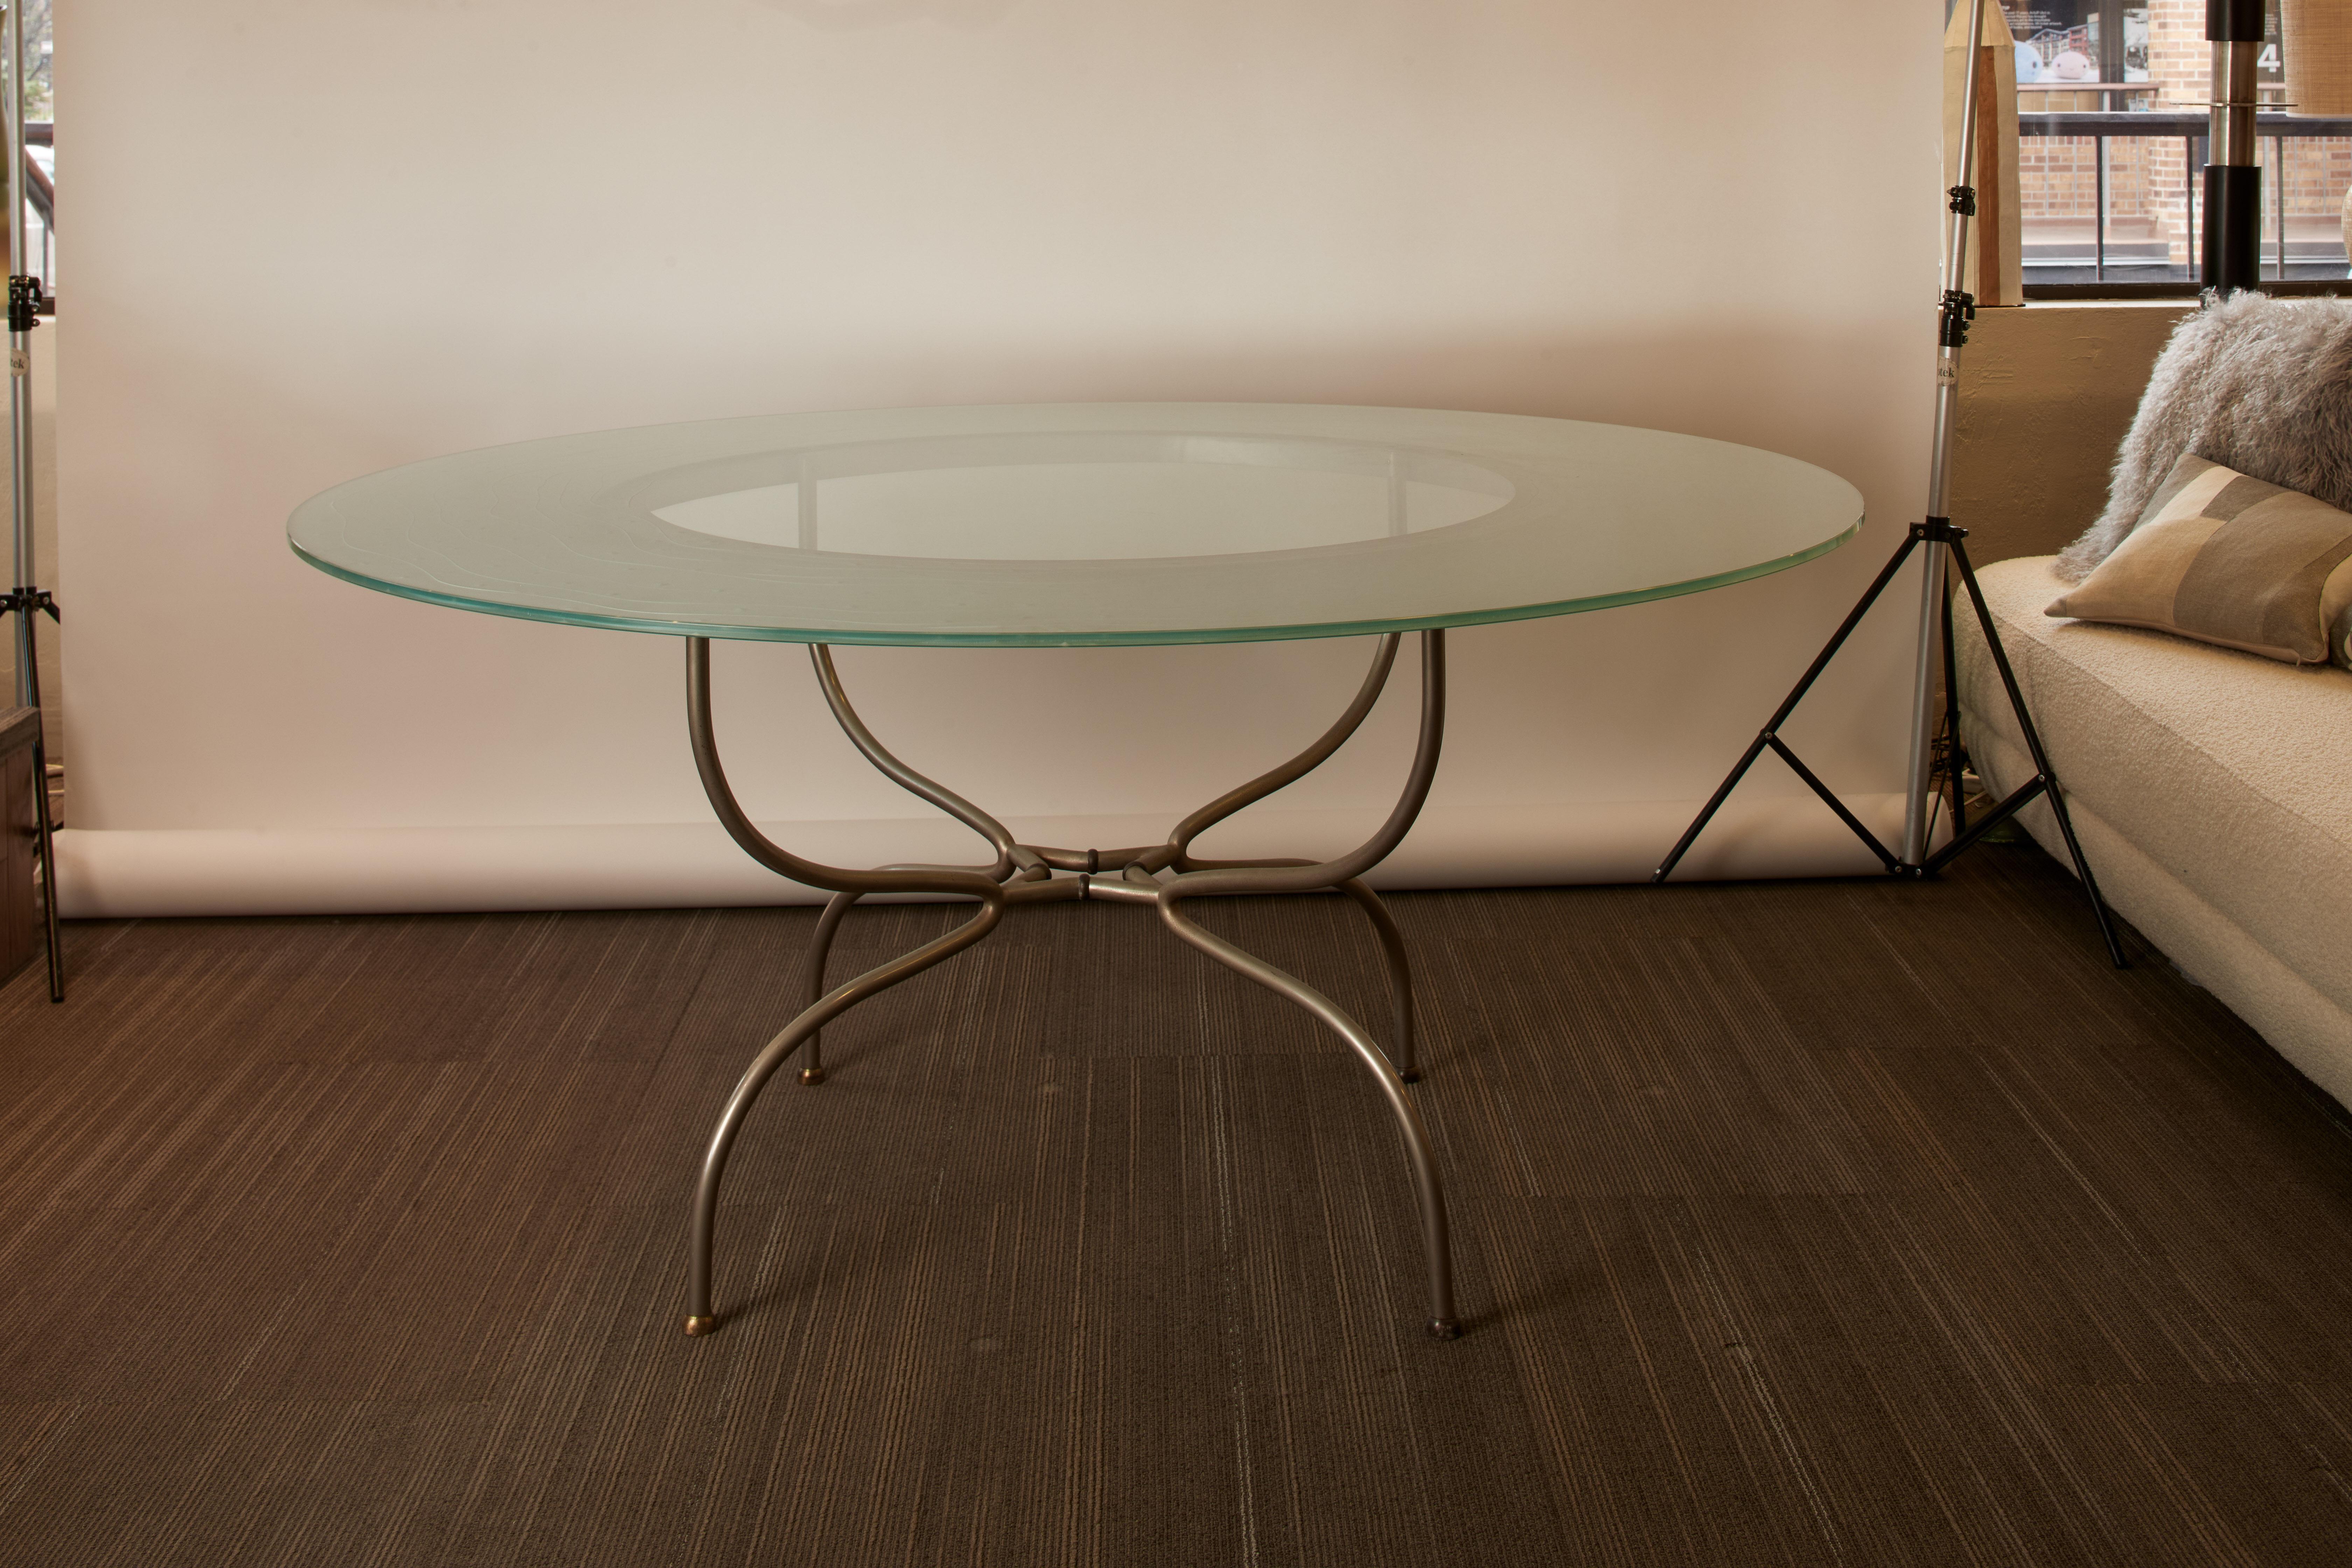 1960s French seaglass color etched glass round table top with chrome legs. Clear circular glass center. Undulating etched lines across the outer rim.